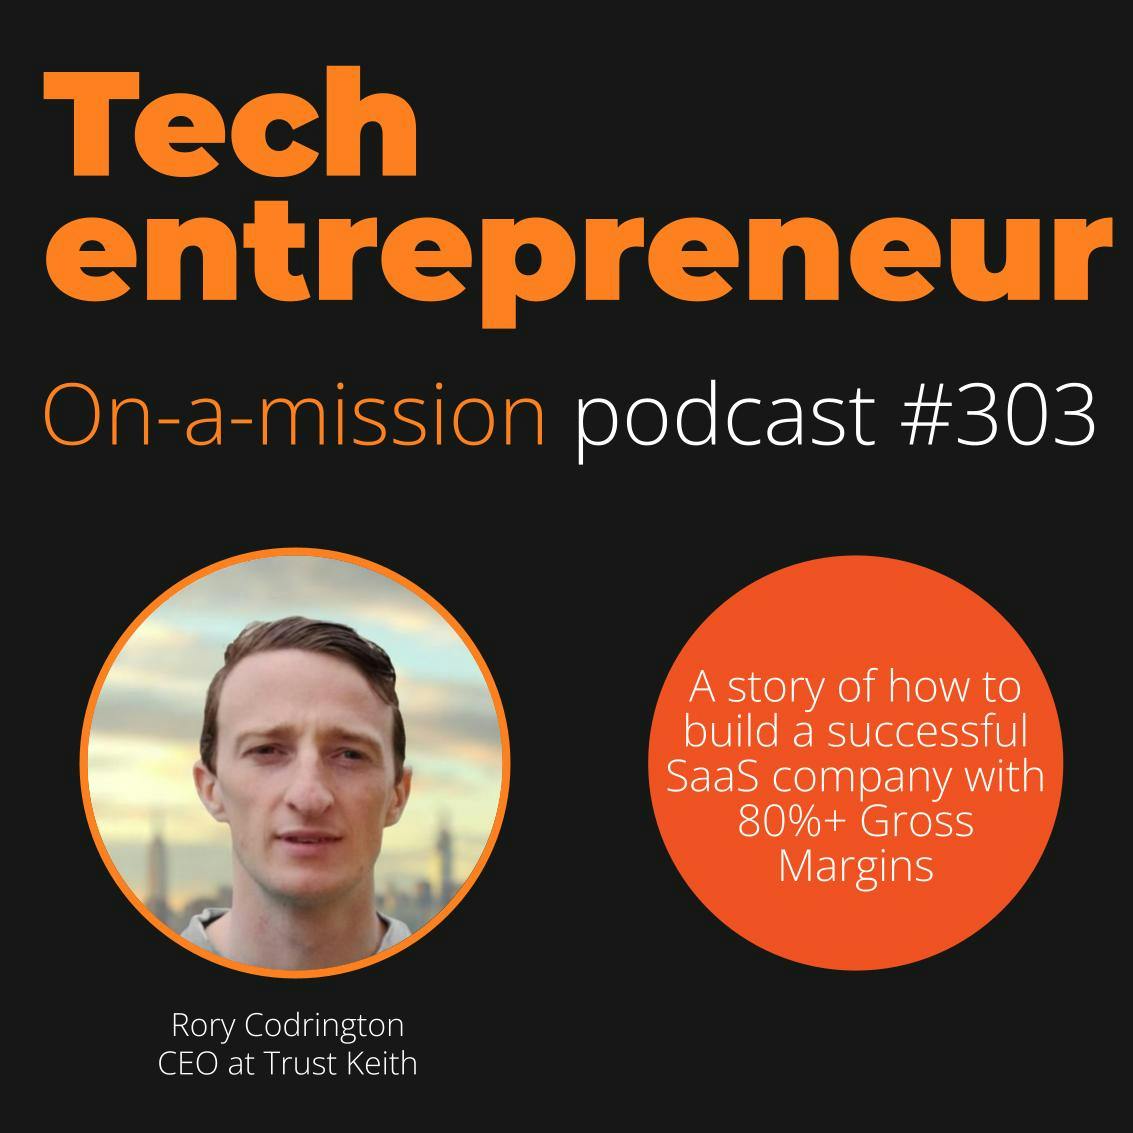 #303 - Rory Codrington, CEO of Trust Keith - on building an exceptional SaaS business.